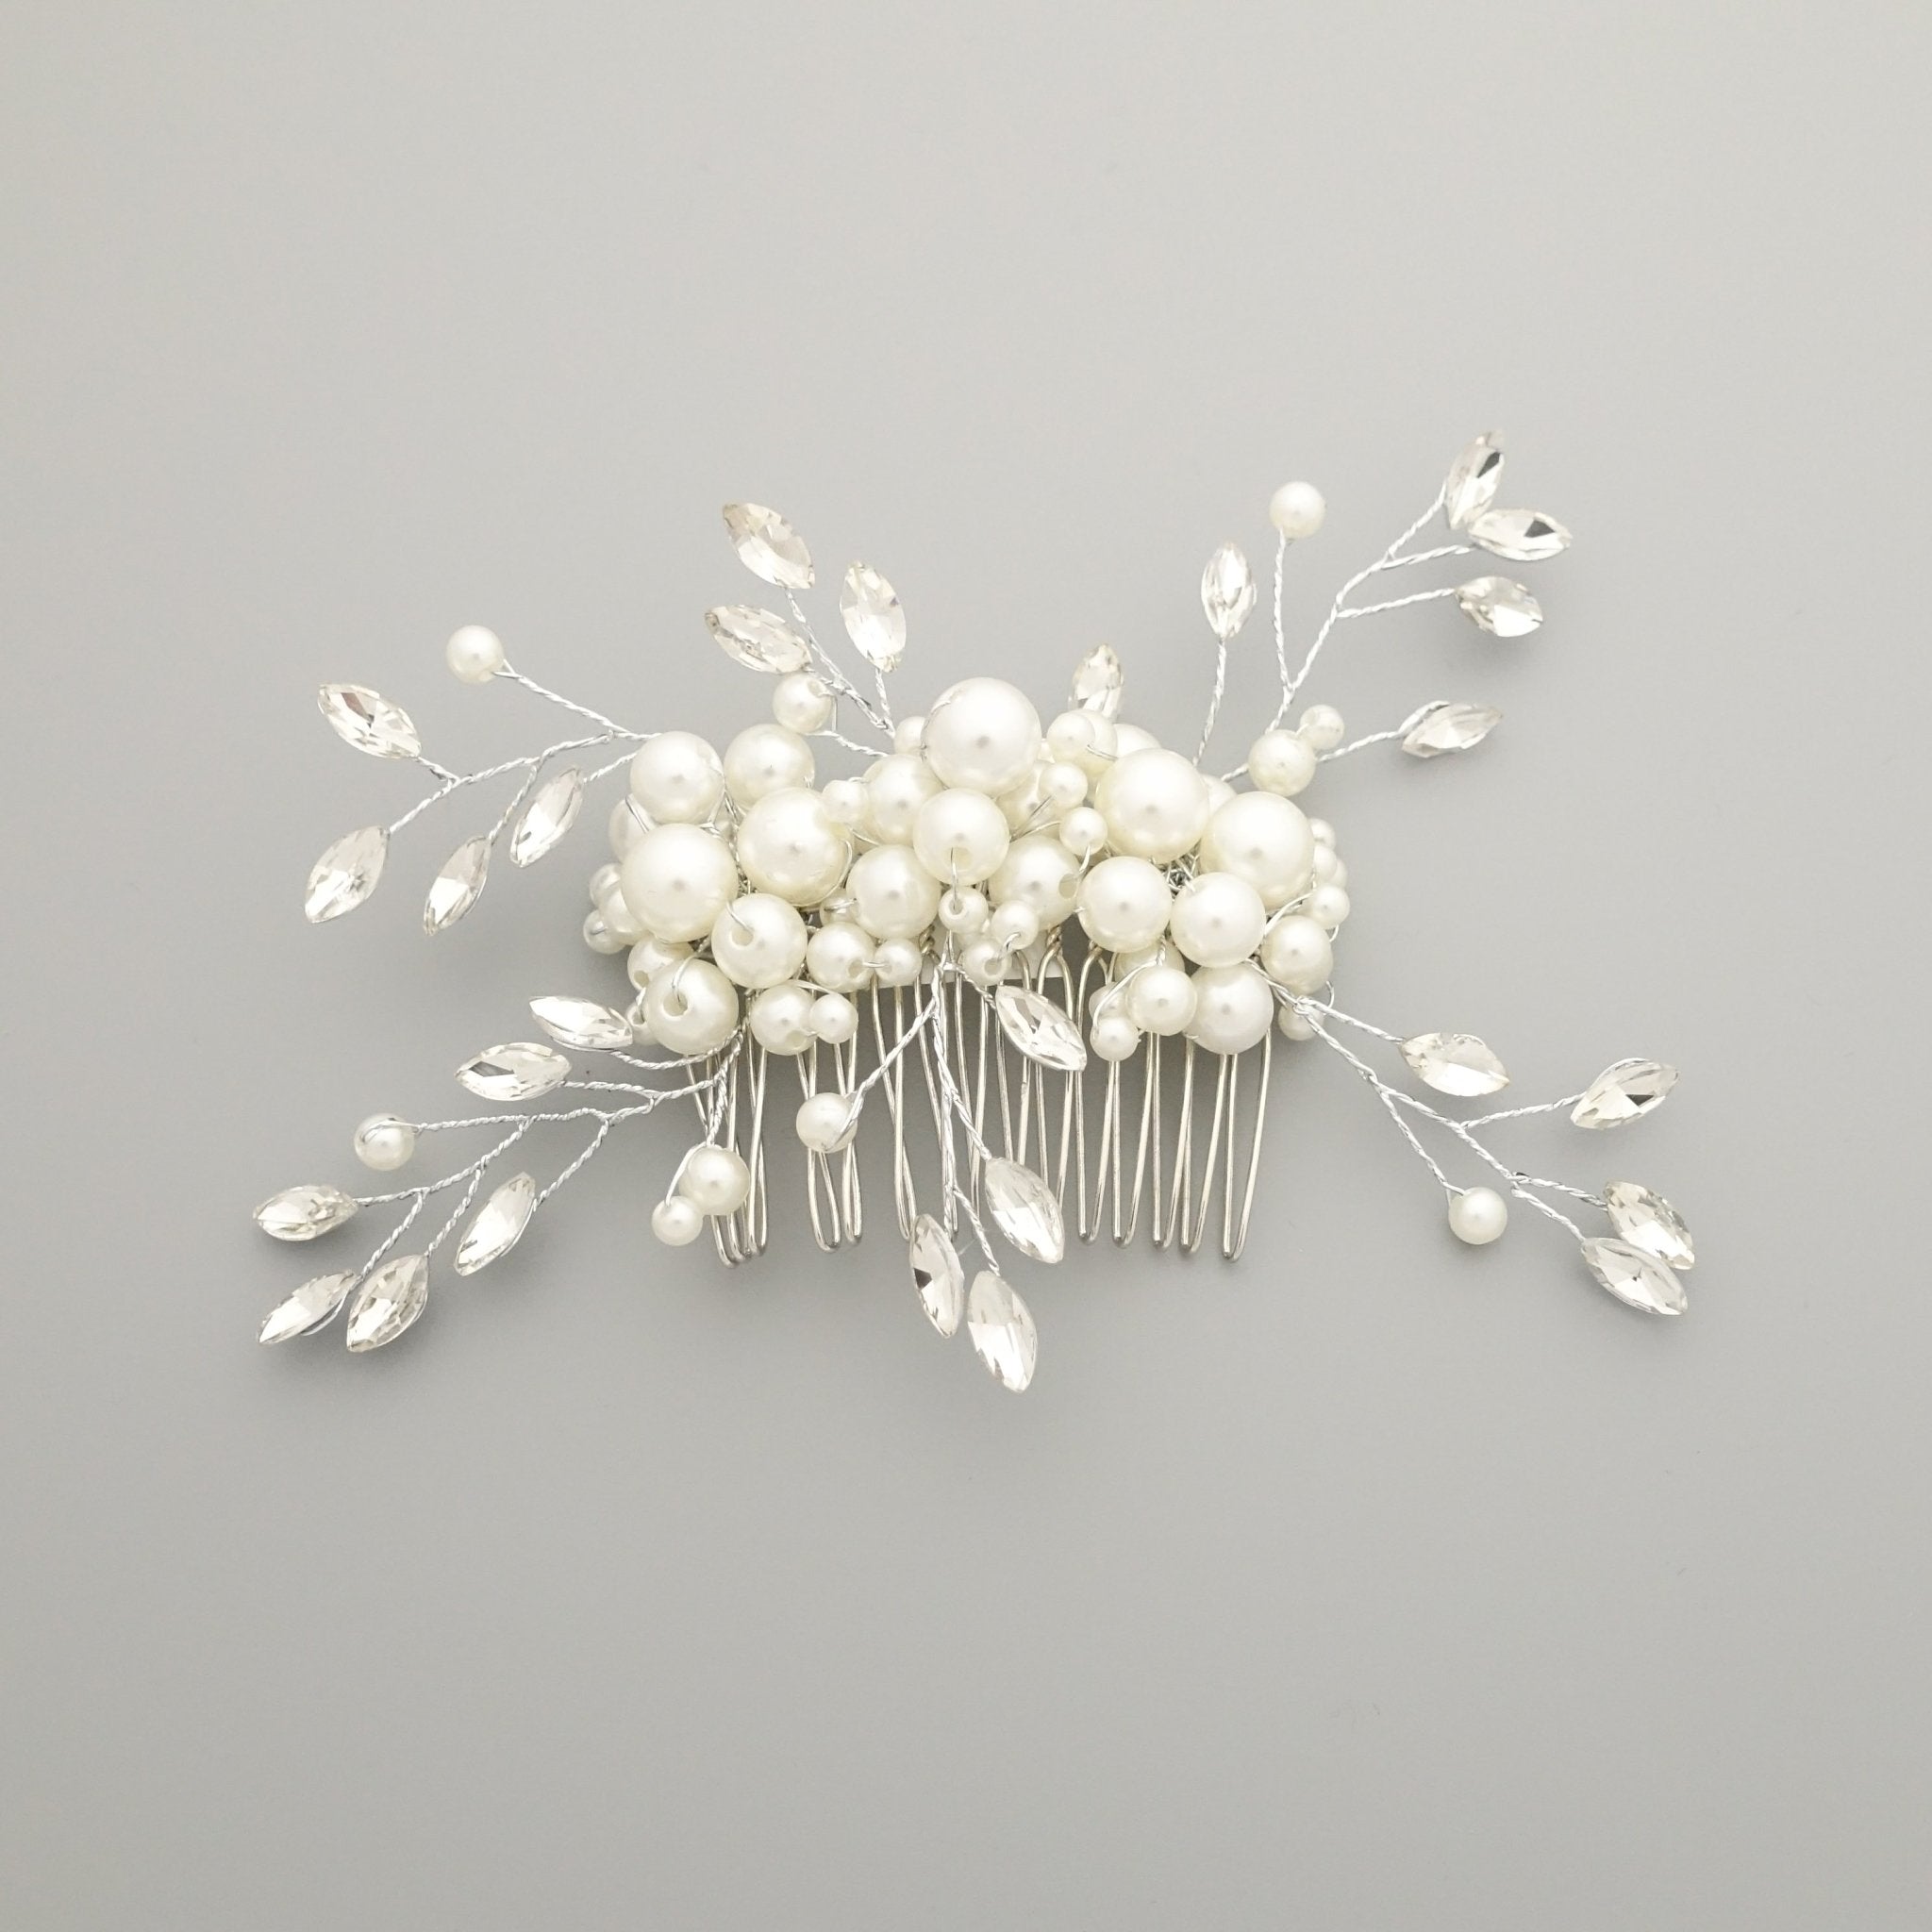 veryshine.com claw/banana/barrette Comb faux pearl acrylic ball glass stone decorated hair clip brooch dress hair comb